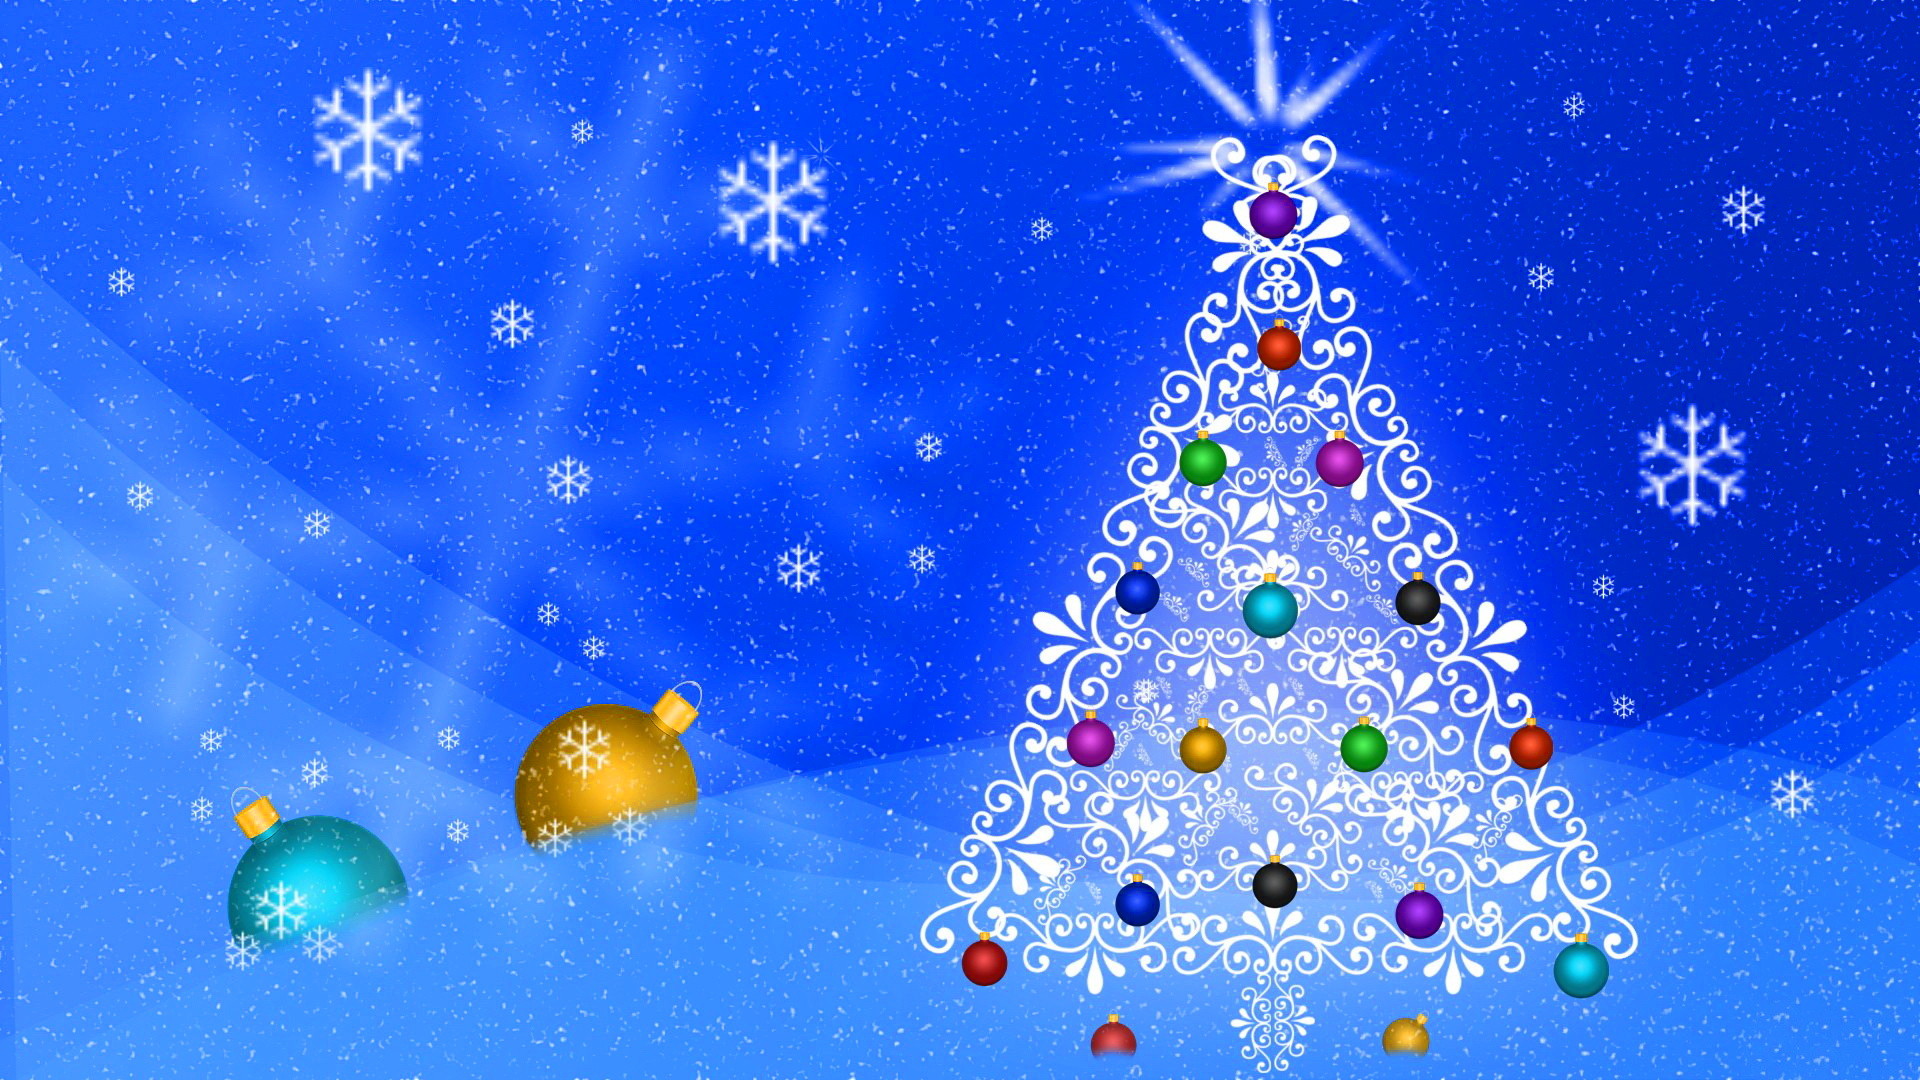 1920x1080 Cute Christmas Tree Backgrounds (15)